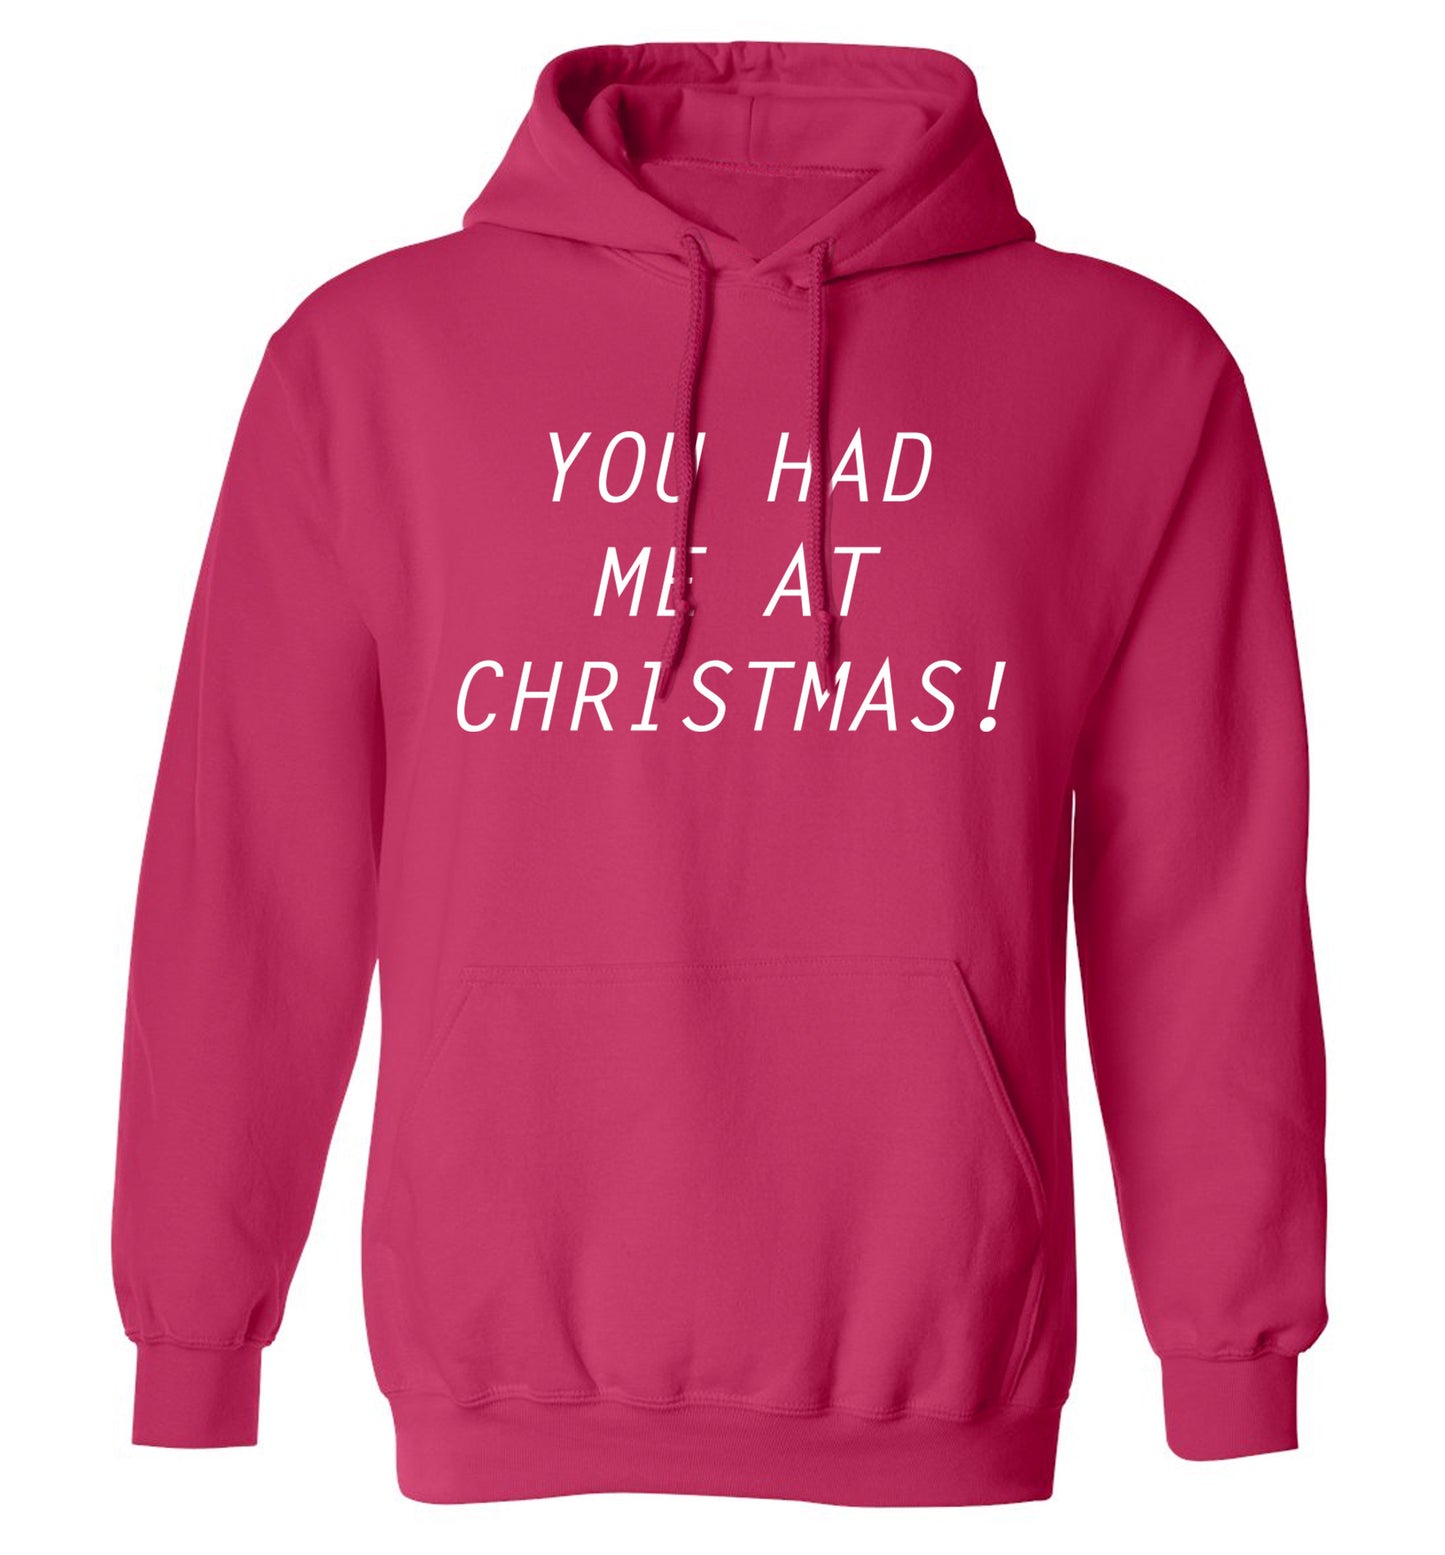 You had me at Christmas adults unisex pink hoodie 2XL